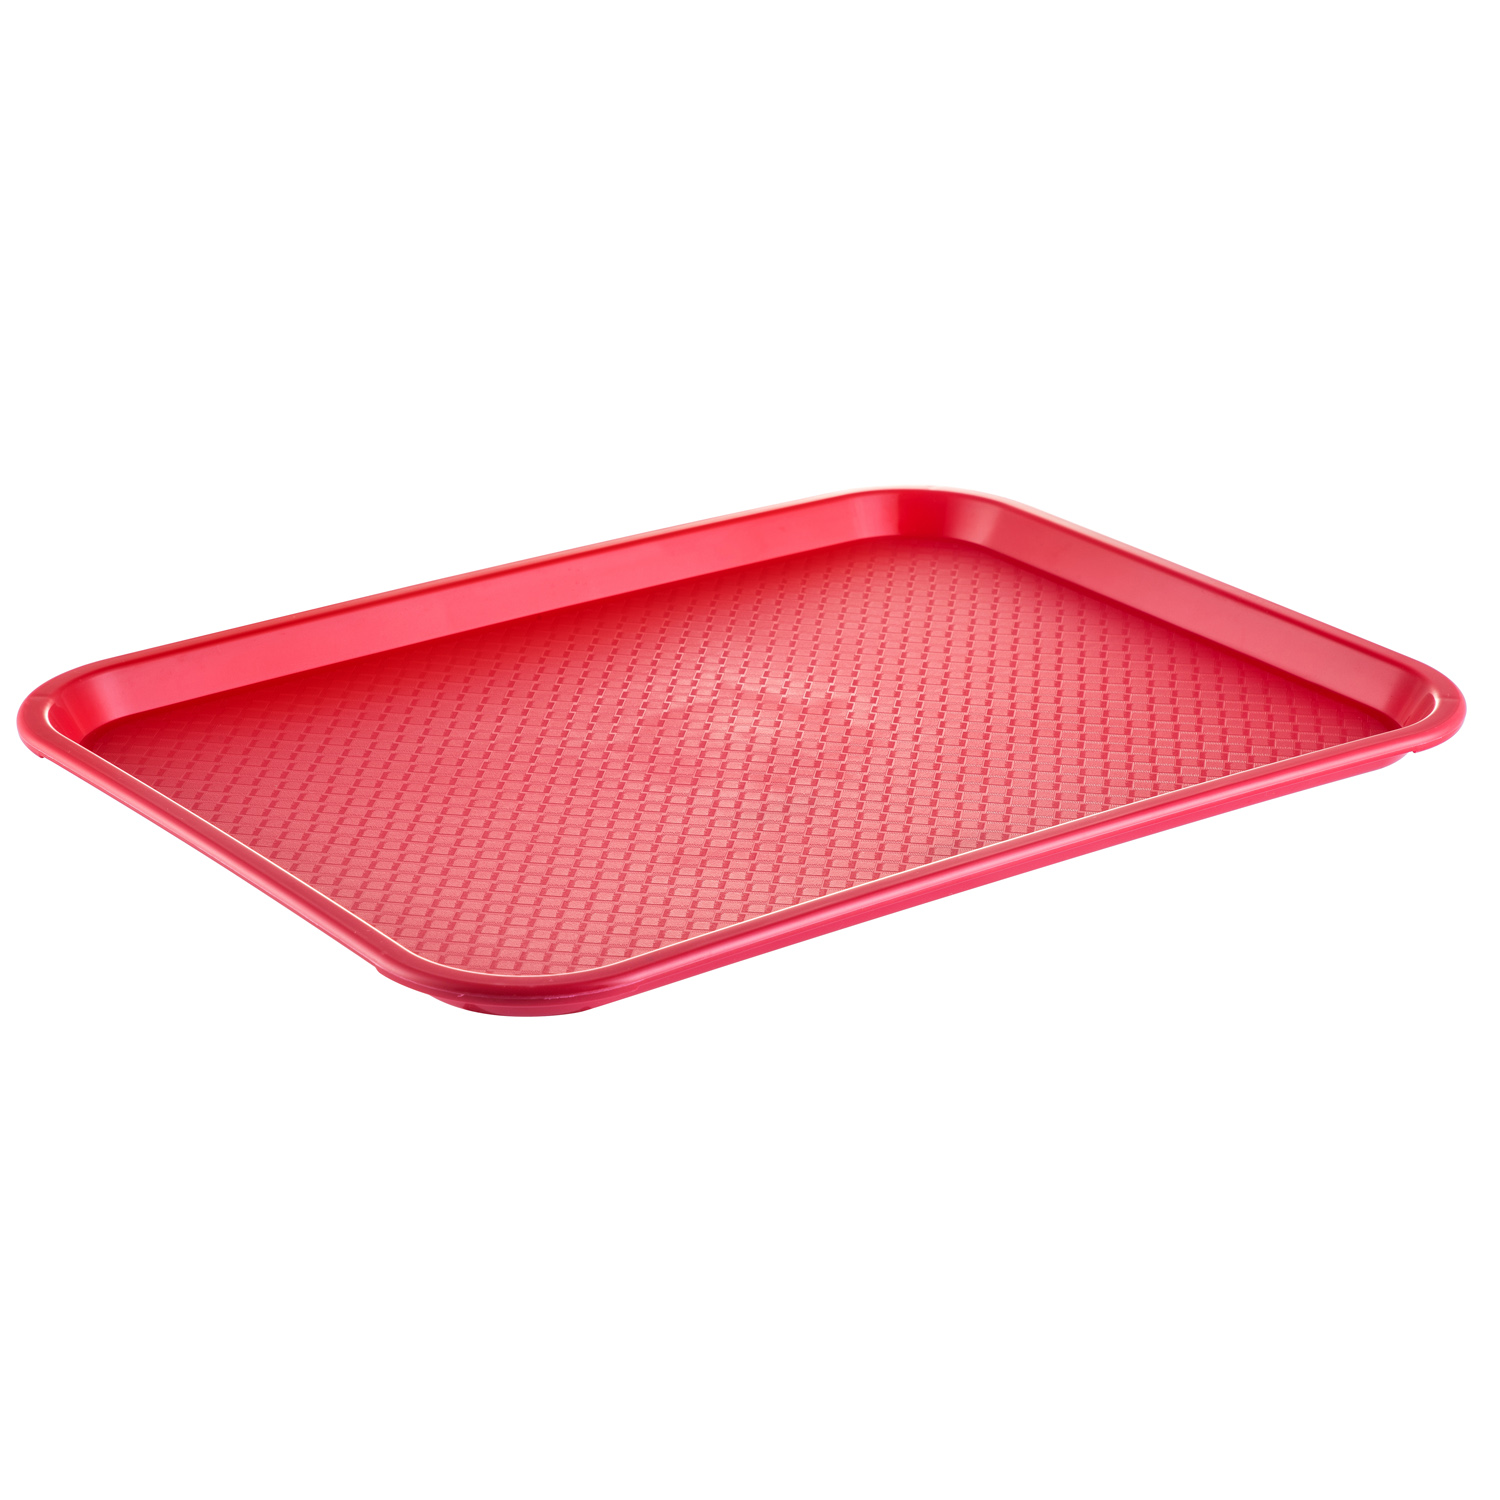 CAC China DSPT-1418R Red Fast Food/Cafeteria Tray, 18" x 14" 